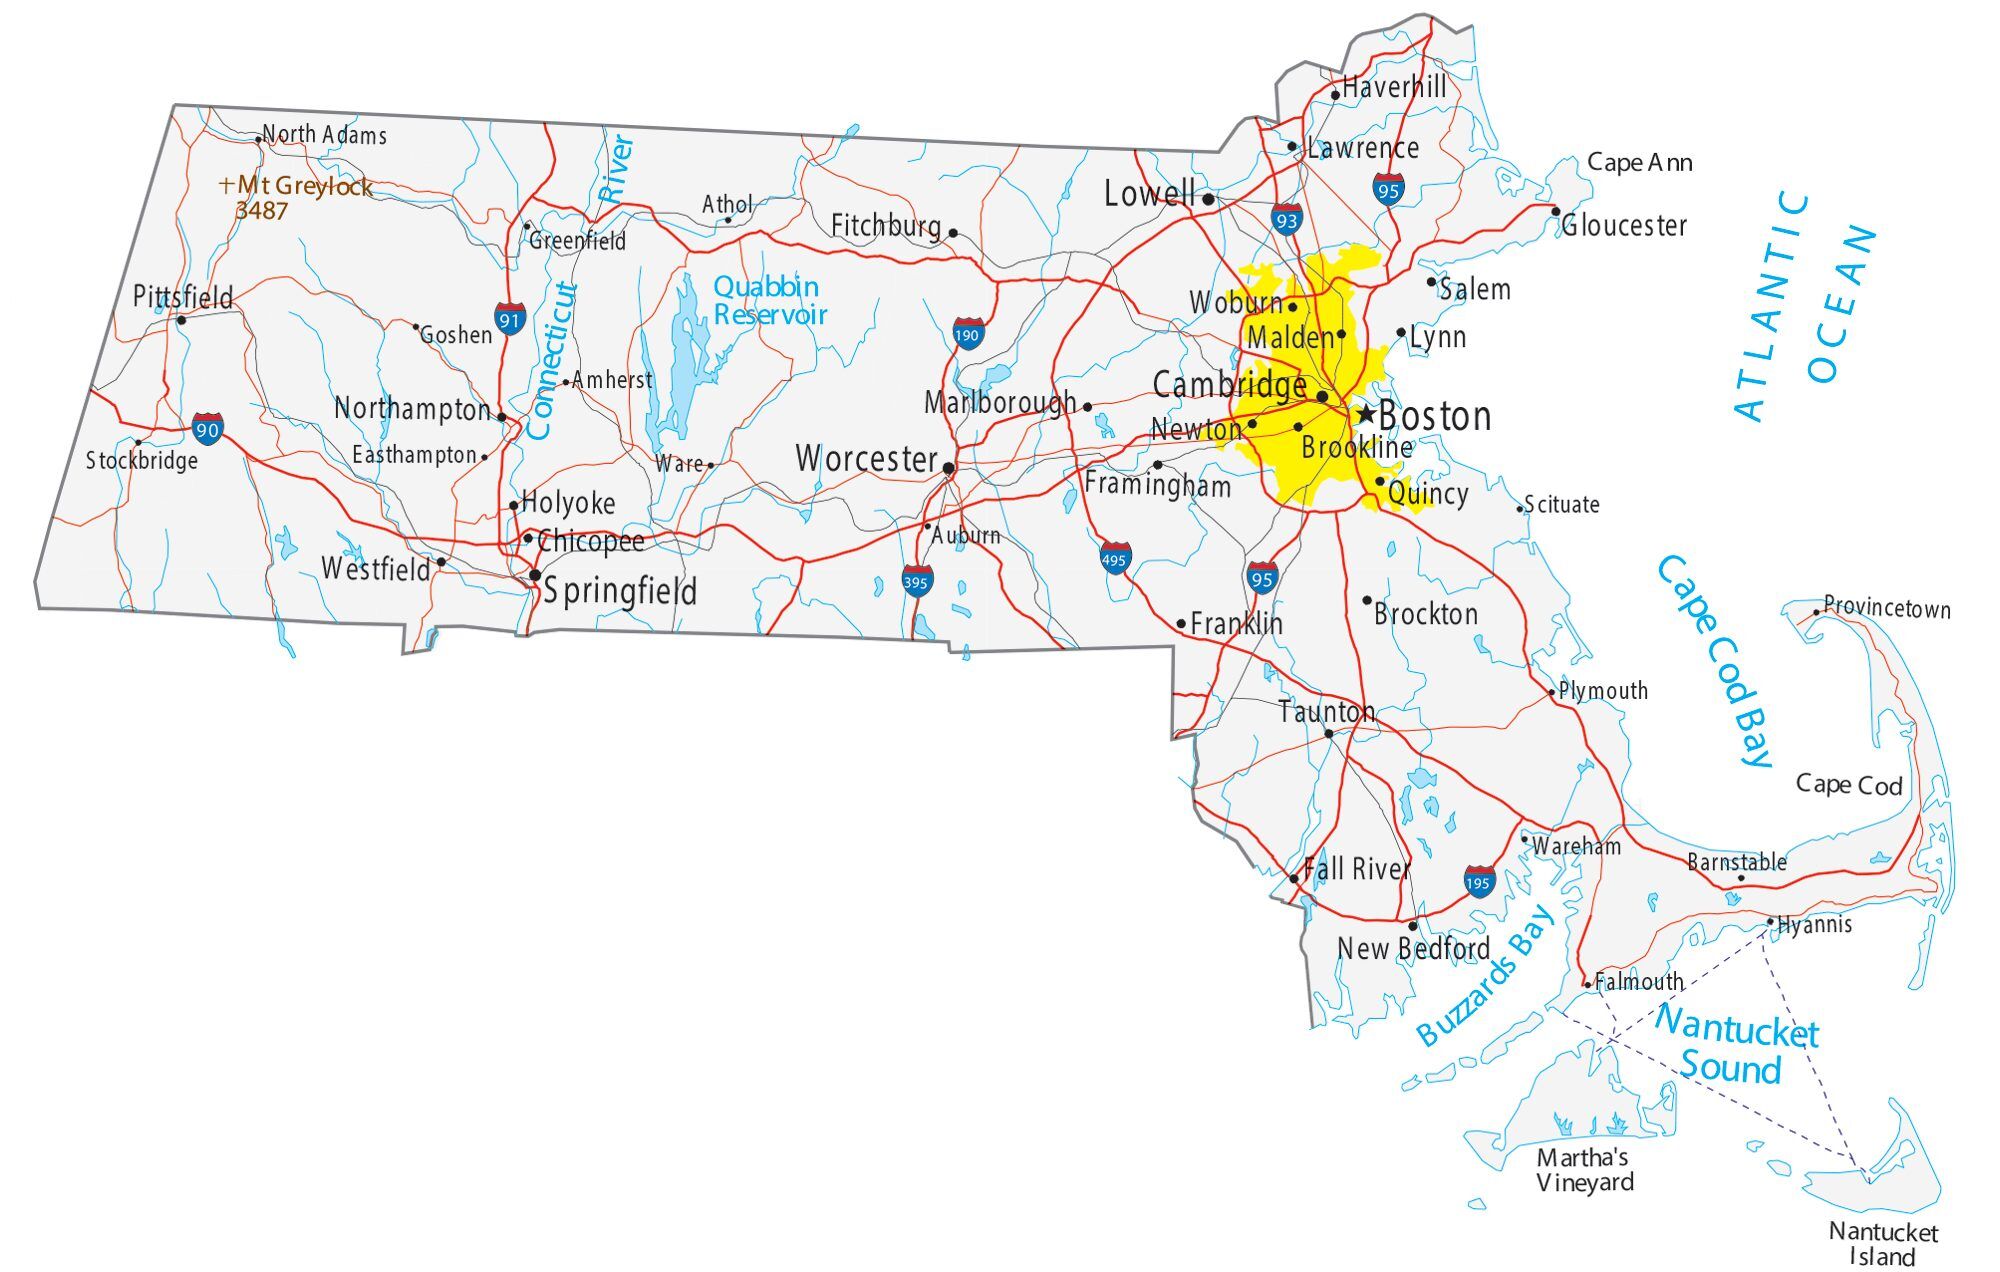 Map of Massachusetts - Cities and Roads - GIS Geography